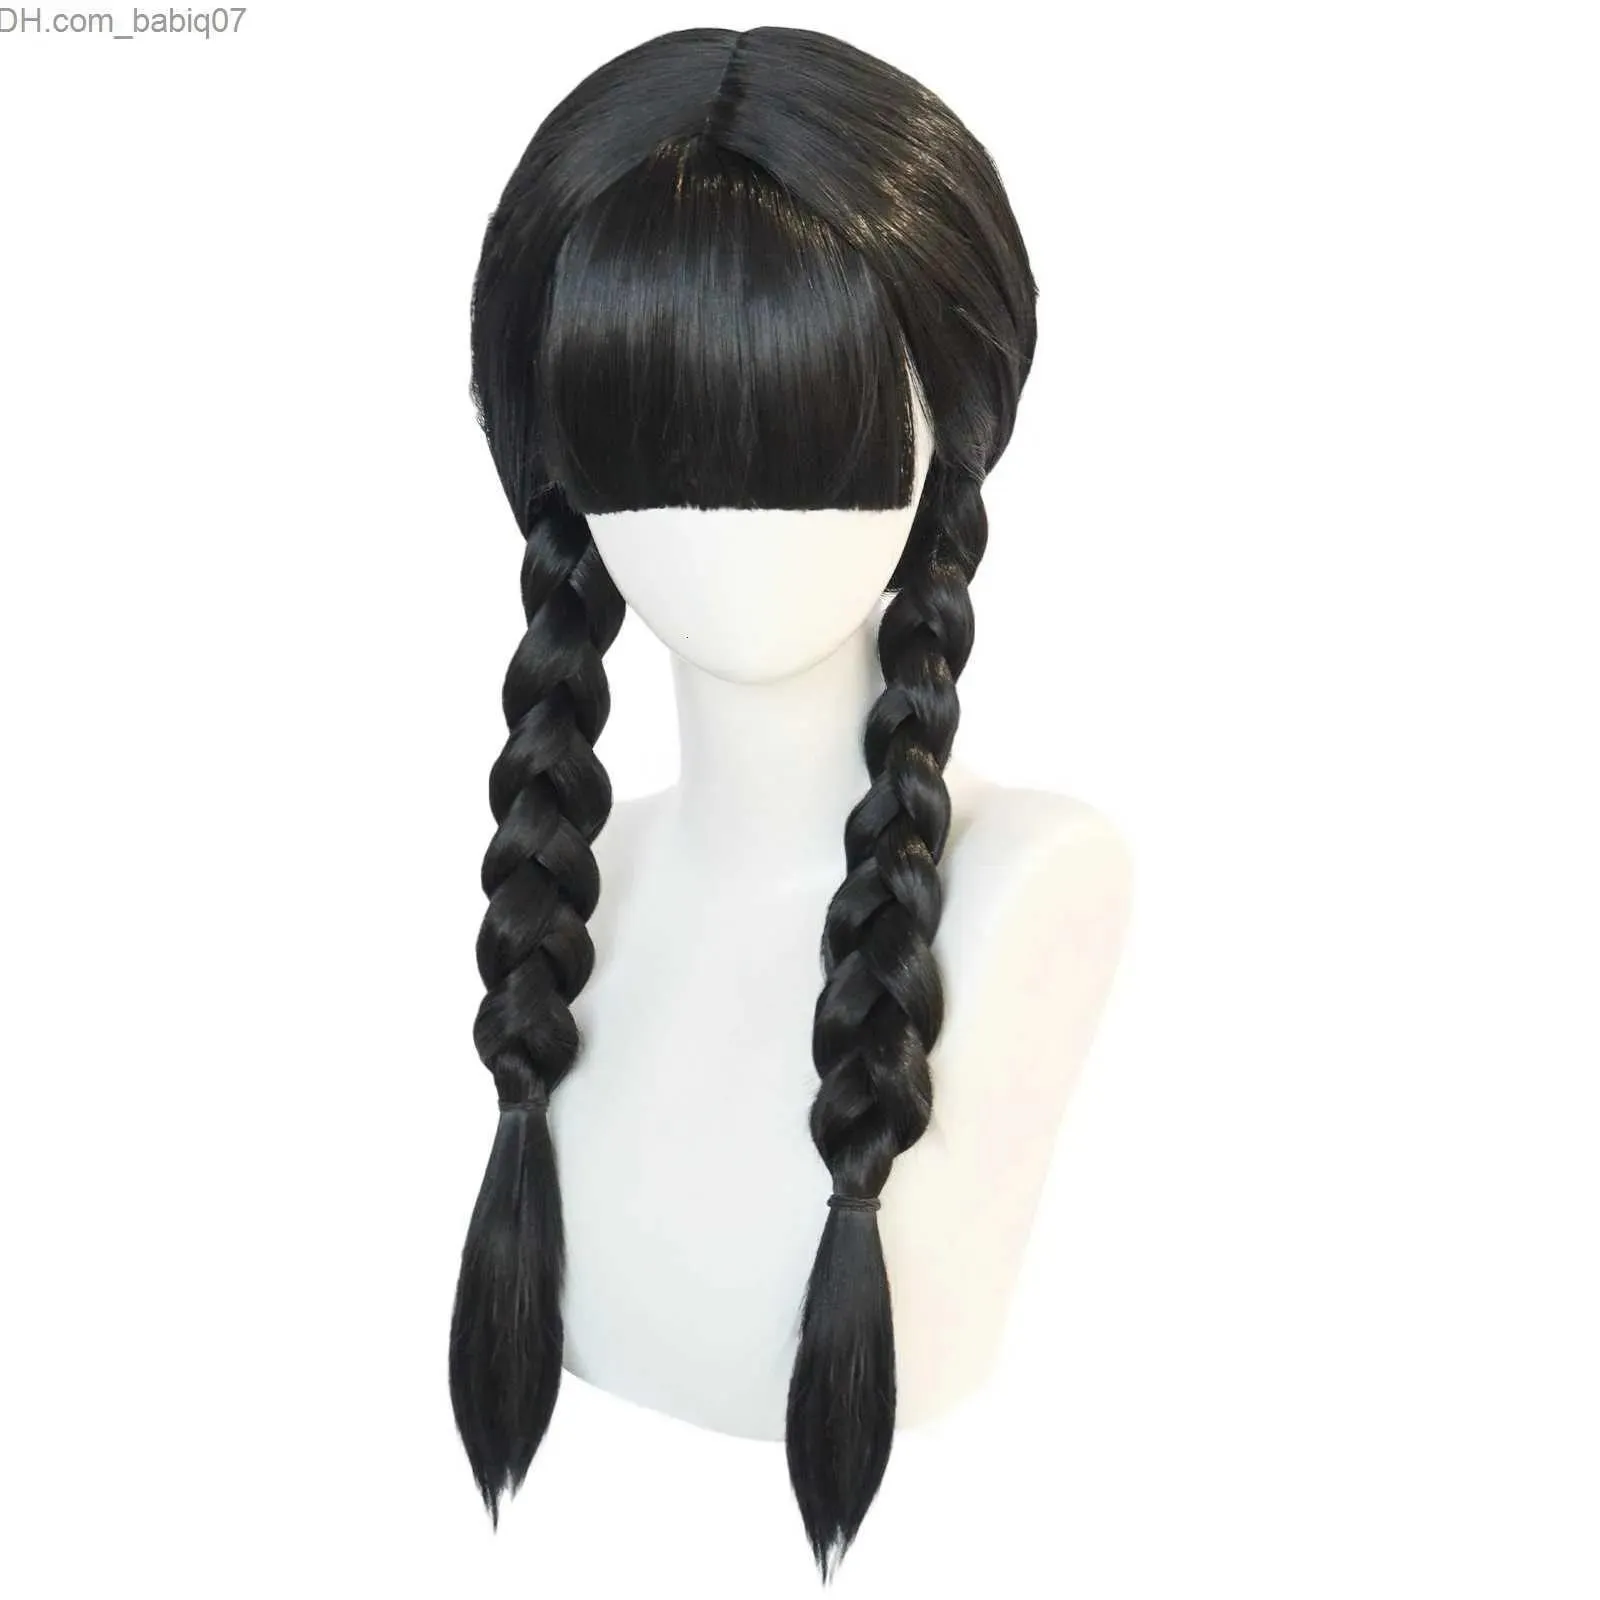 Wigs Synthetic Wigs Synthetic Wigs Anogol Wednesday Addams Cosplay Wig Movie The Family Long Black Braids Hair with Bangs for Halloween